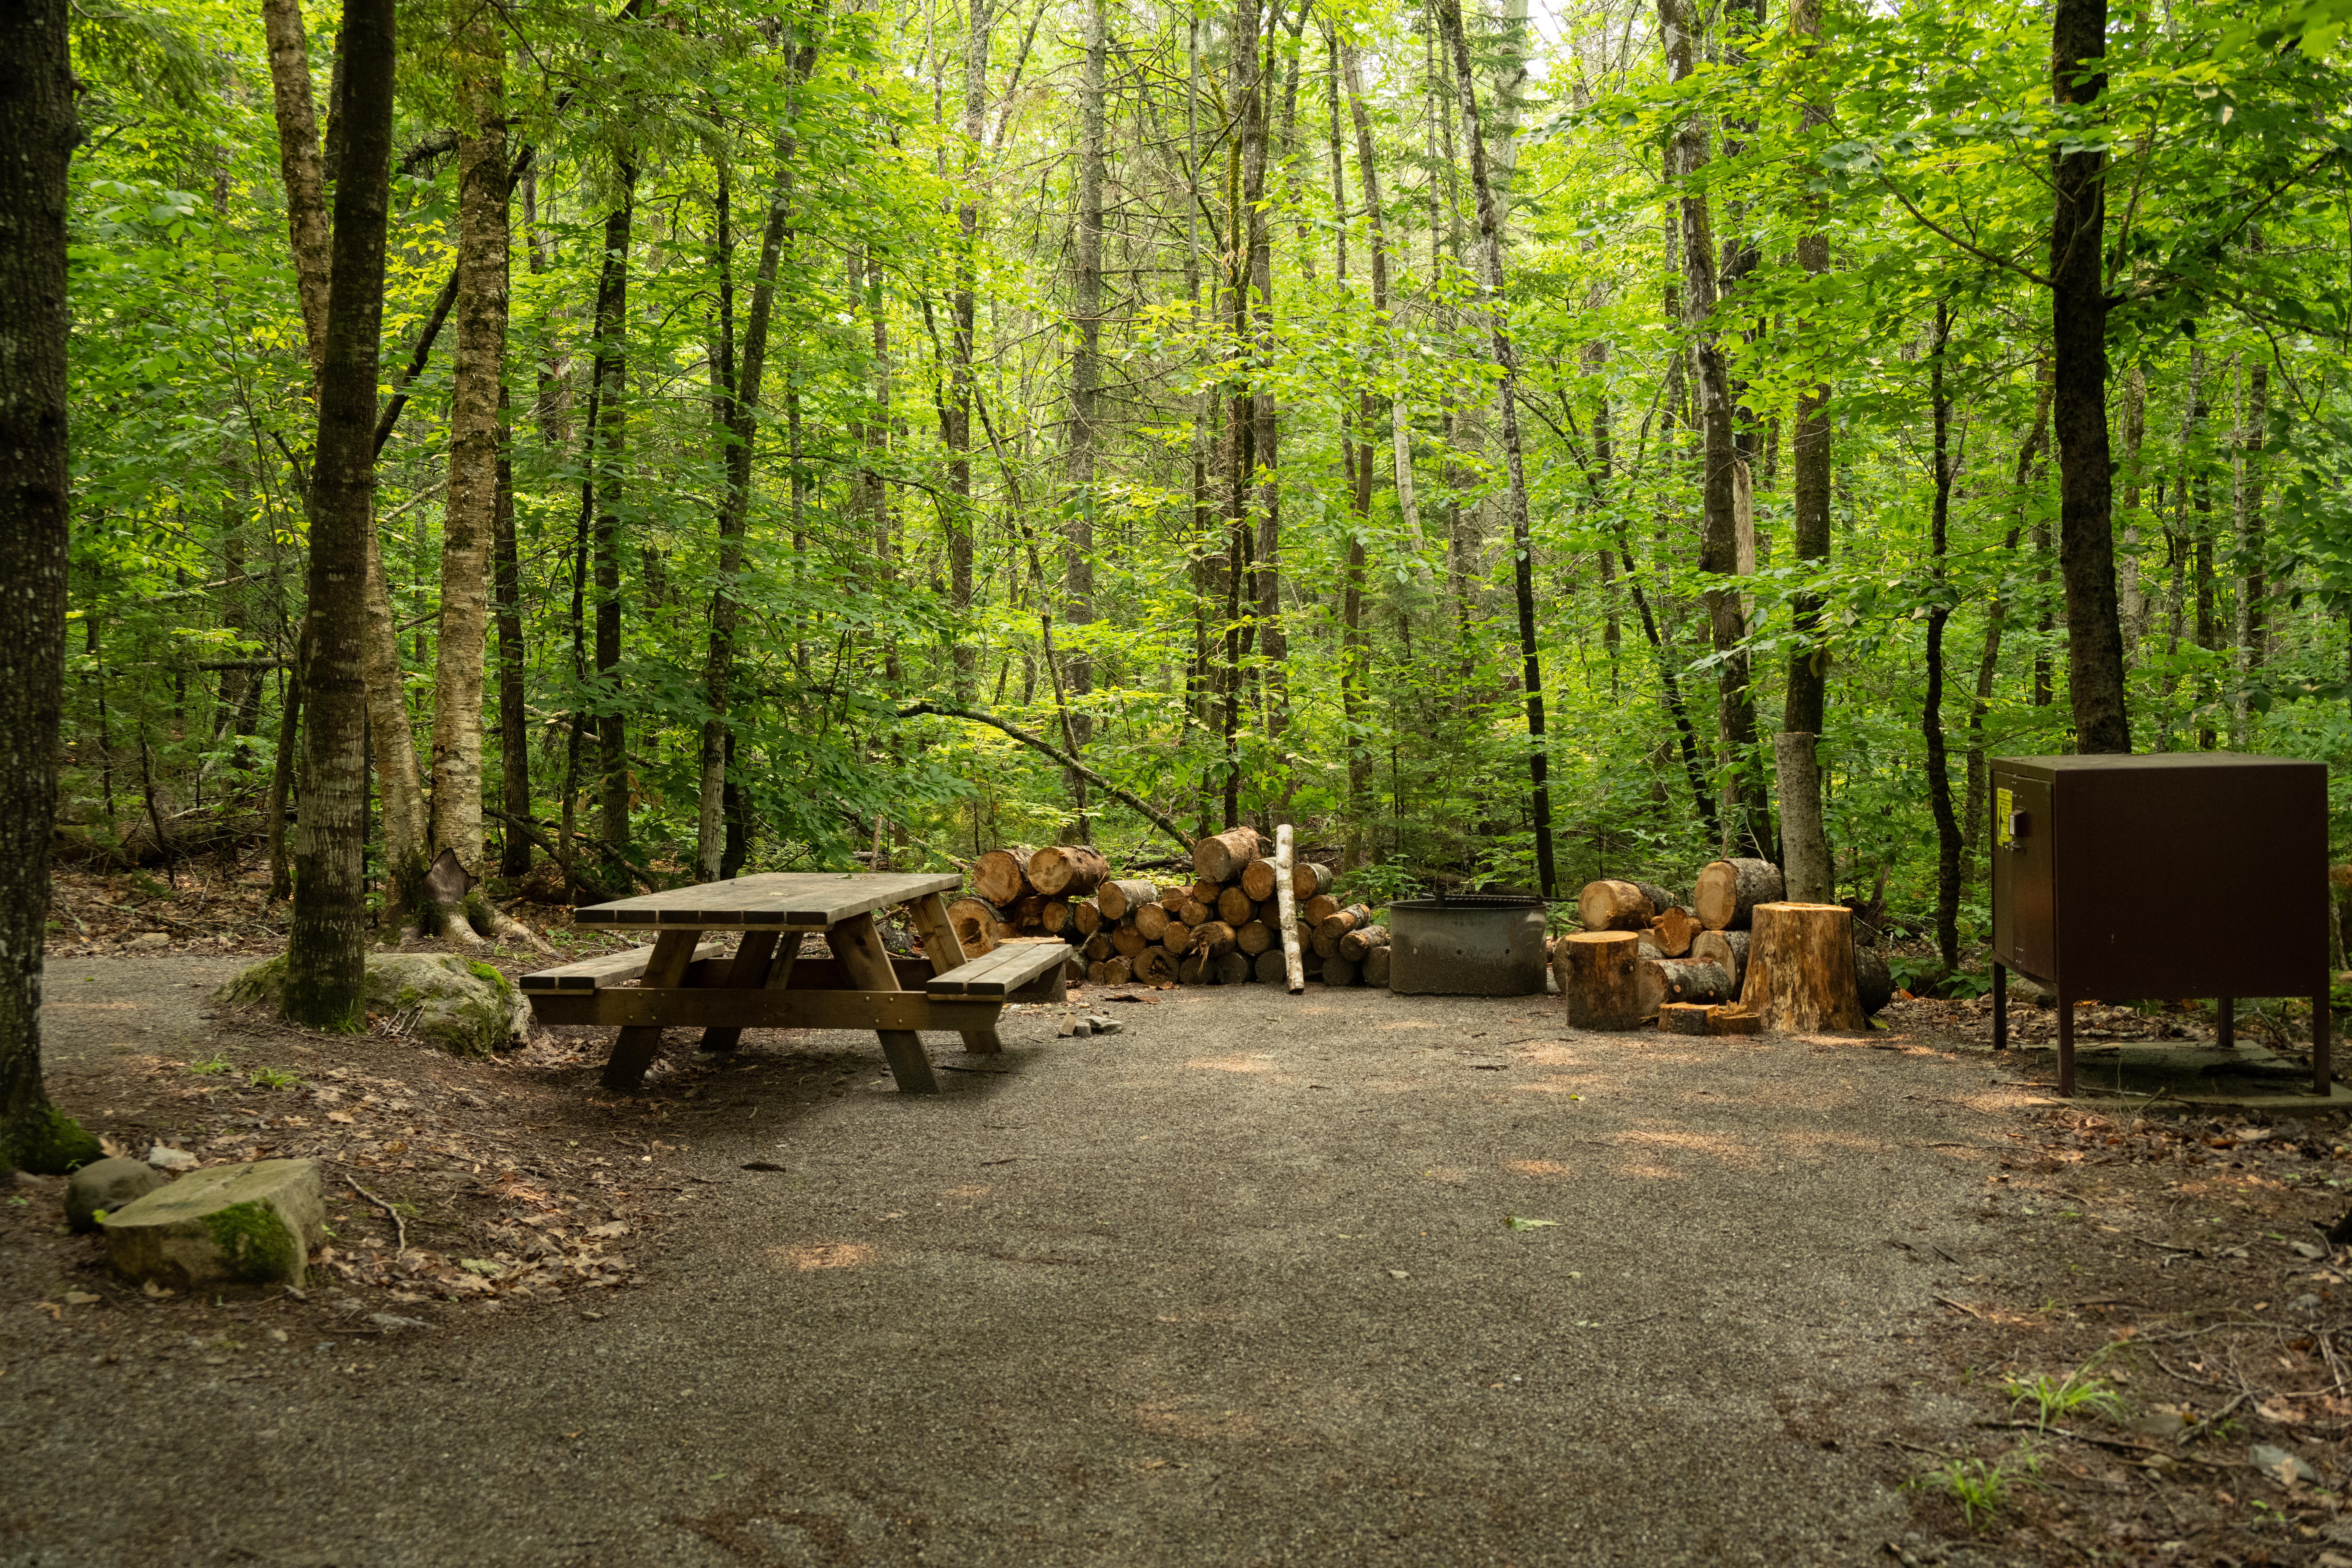 A campsite with metal fire ring, picnic table, and bear box within a forest.